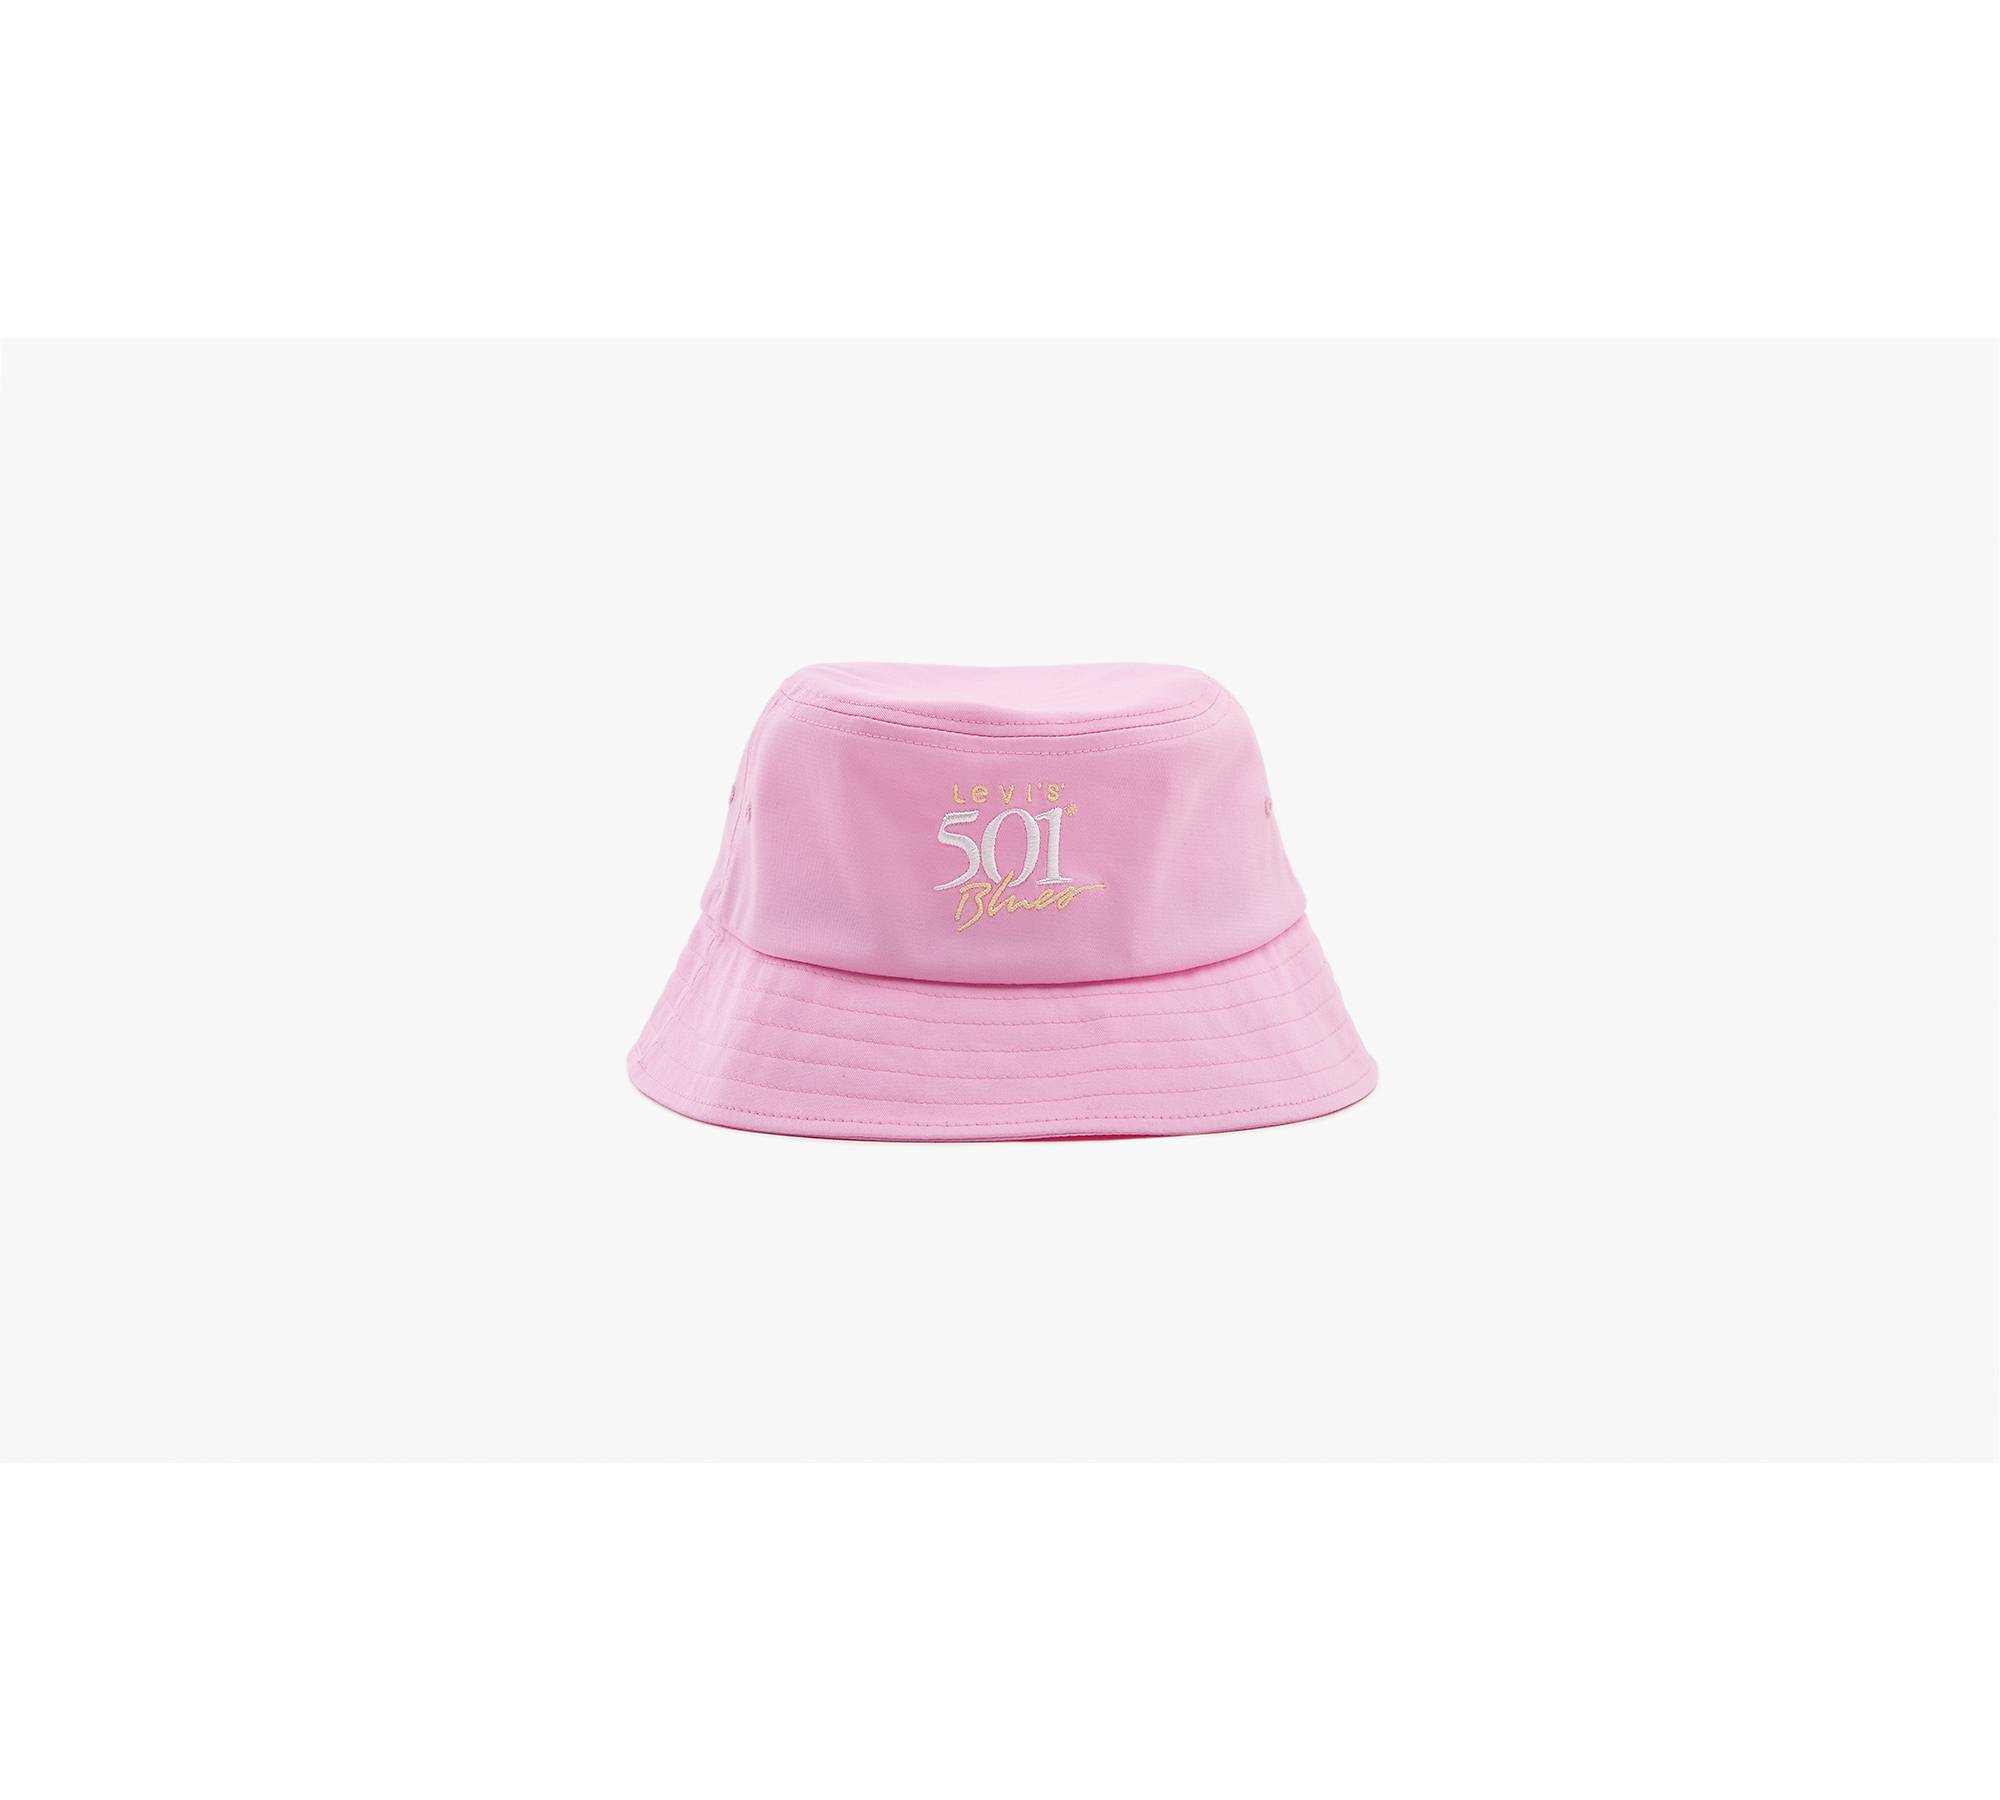 Levi's 501 Blues Bucket Hat in Regular Pink D7079-0001 Women's Large L Nwt New!